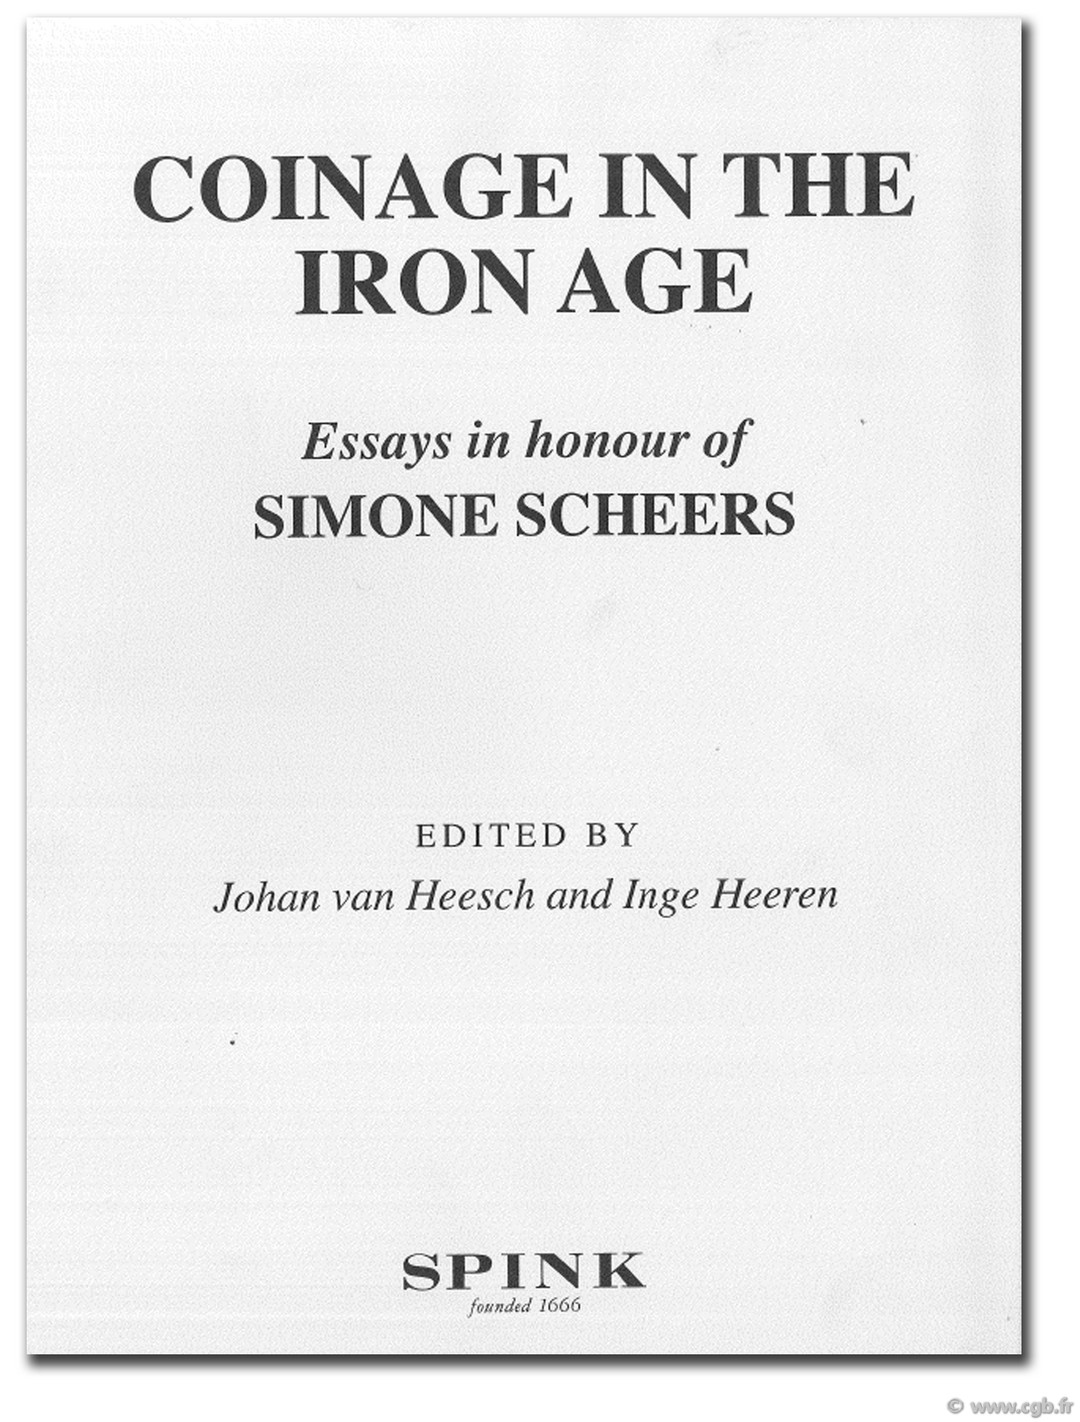 Coinage in the iron age, essays in honour of Simone Scheers Collectif